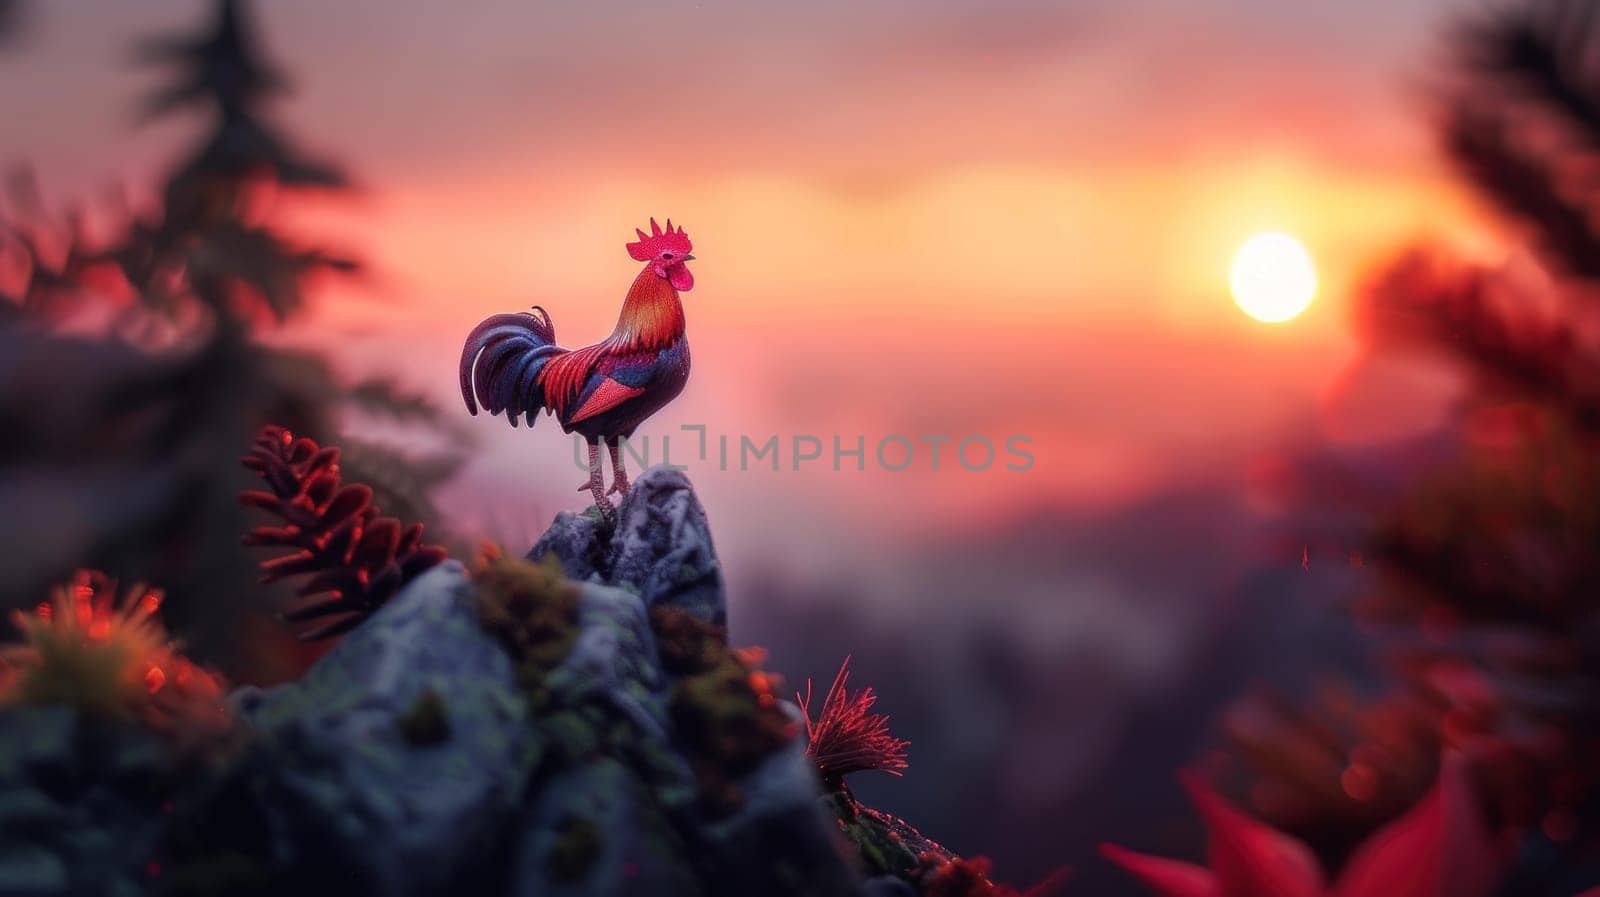 Rooster Standing on Mountain Peak at Sunrise with Exaggerated Features for Miniature Diorama Concept Magical and Whimsical Atmosphere.